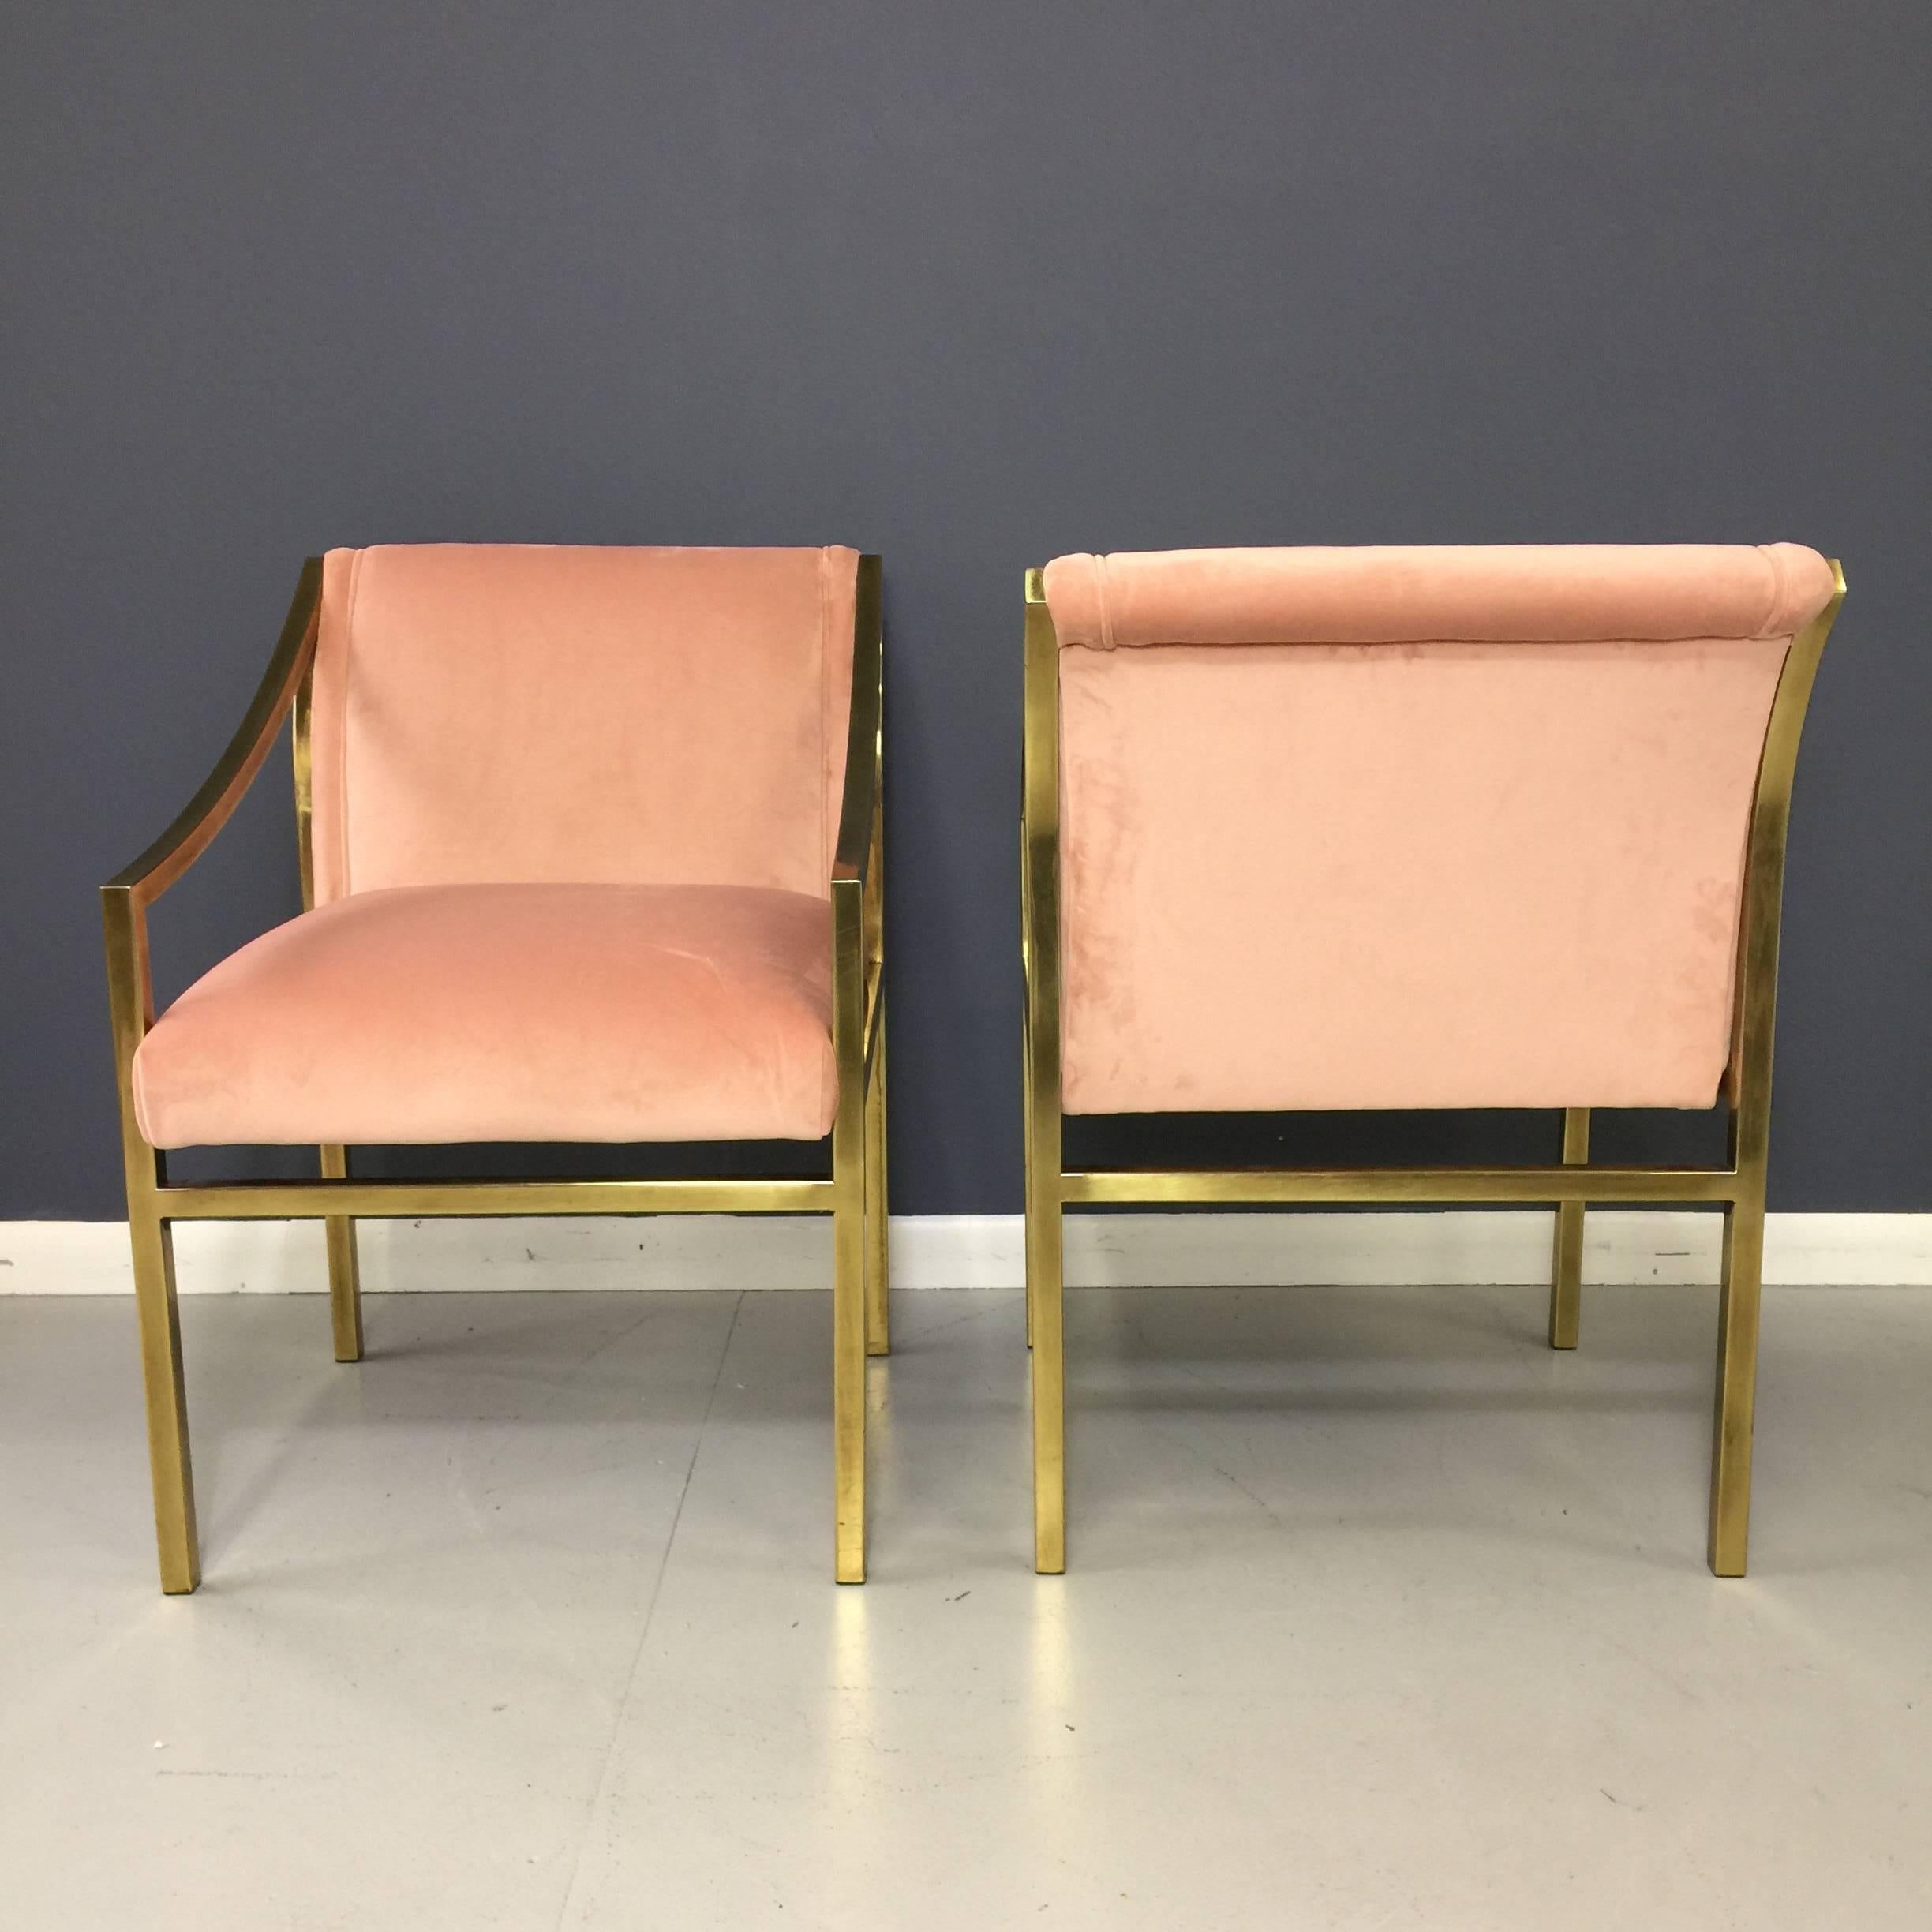 Hollywood Regency Pair of Blush Pink Velvet and Brass Armchairs